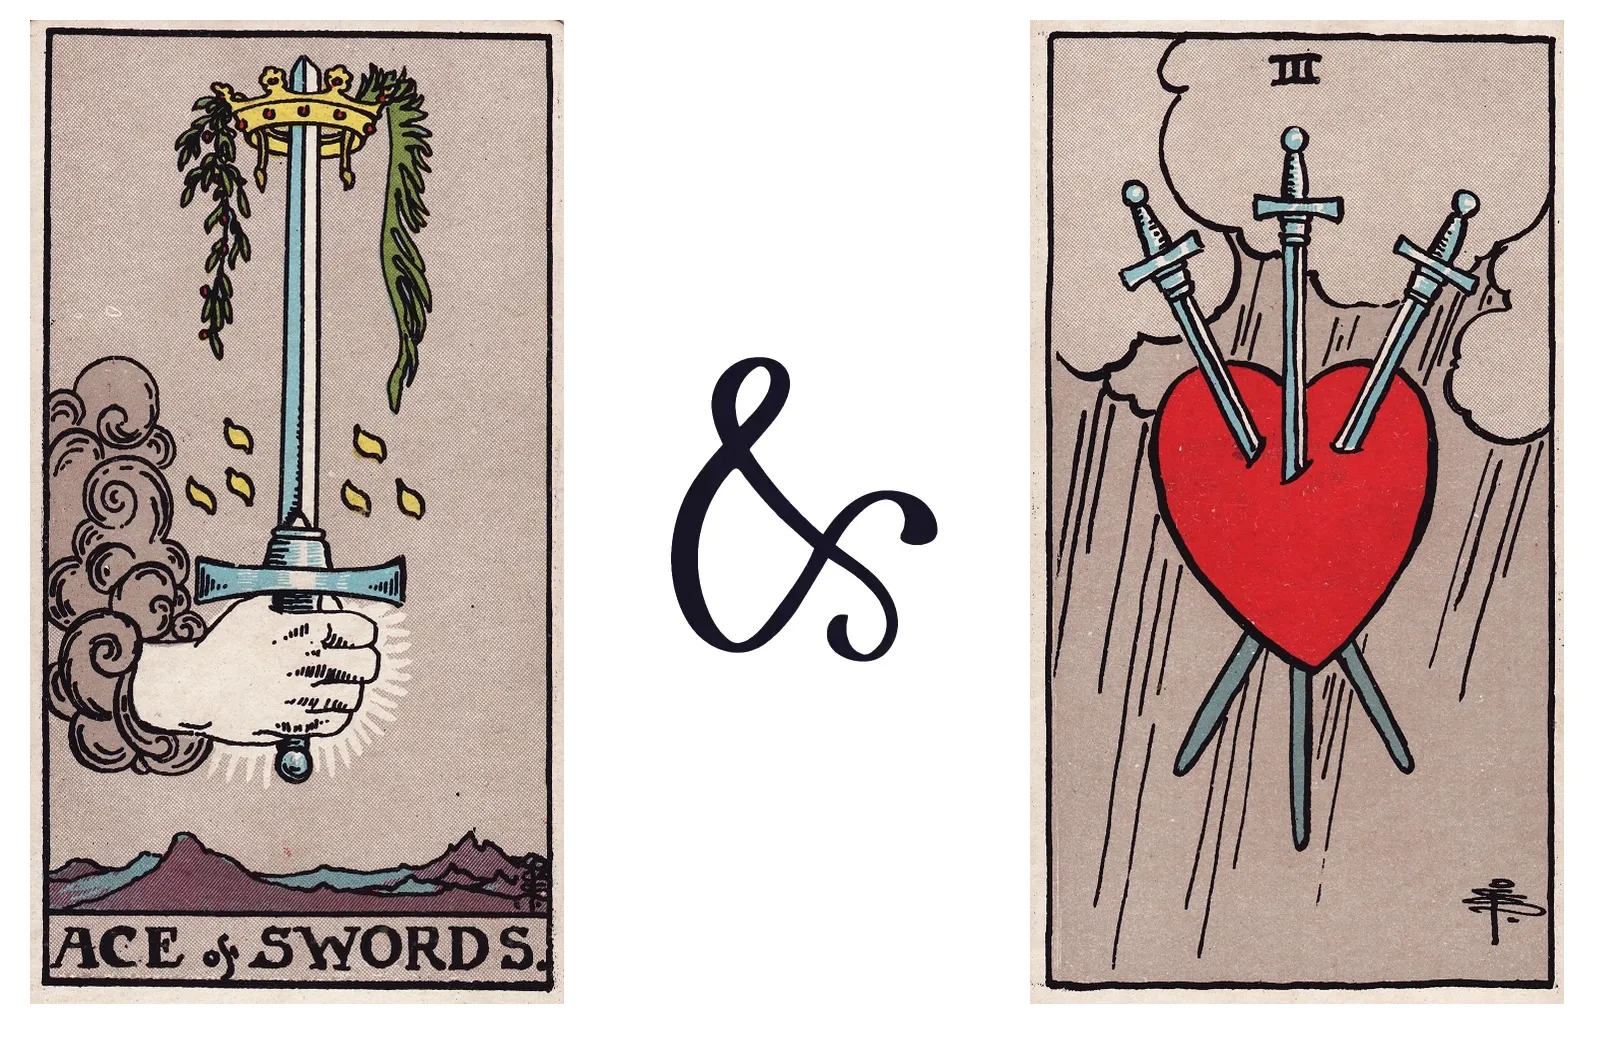 Ace of Swords and Three of Swords